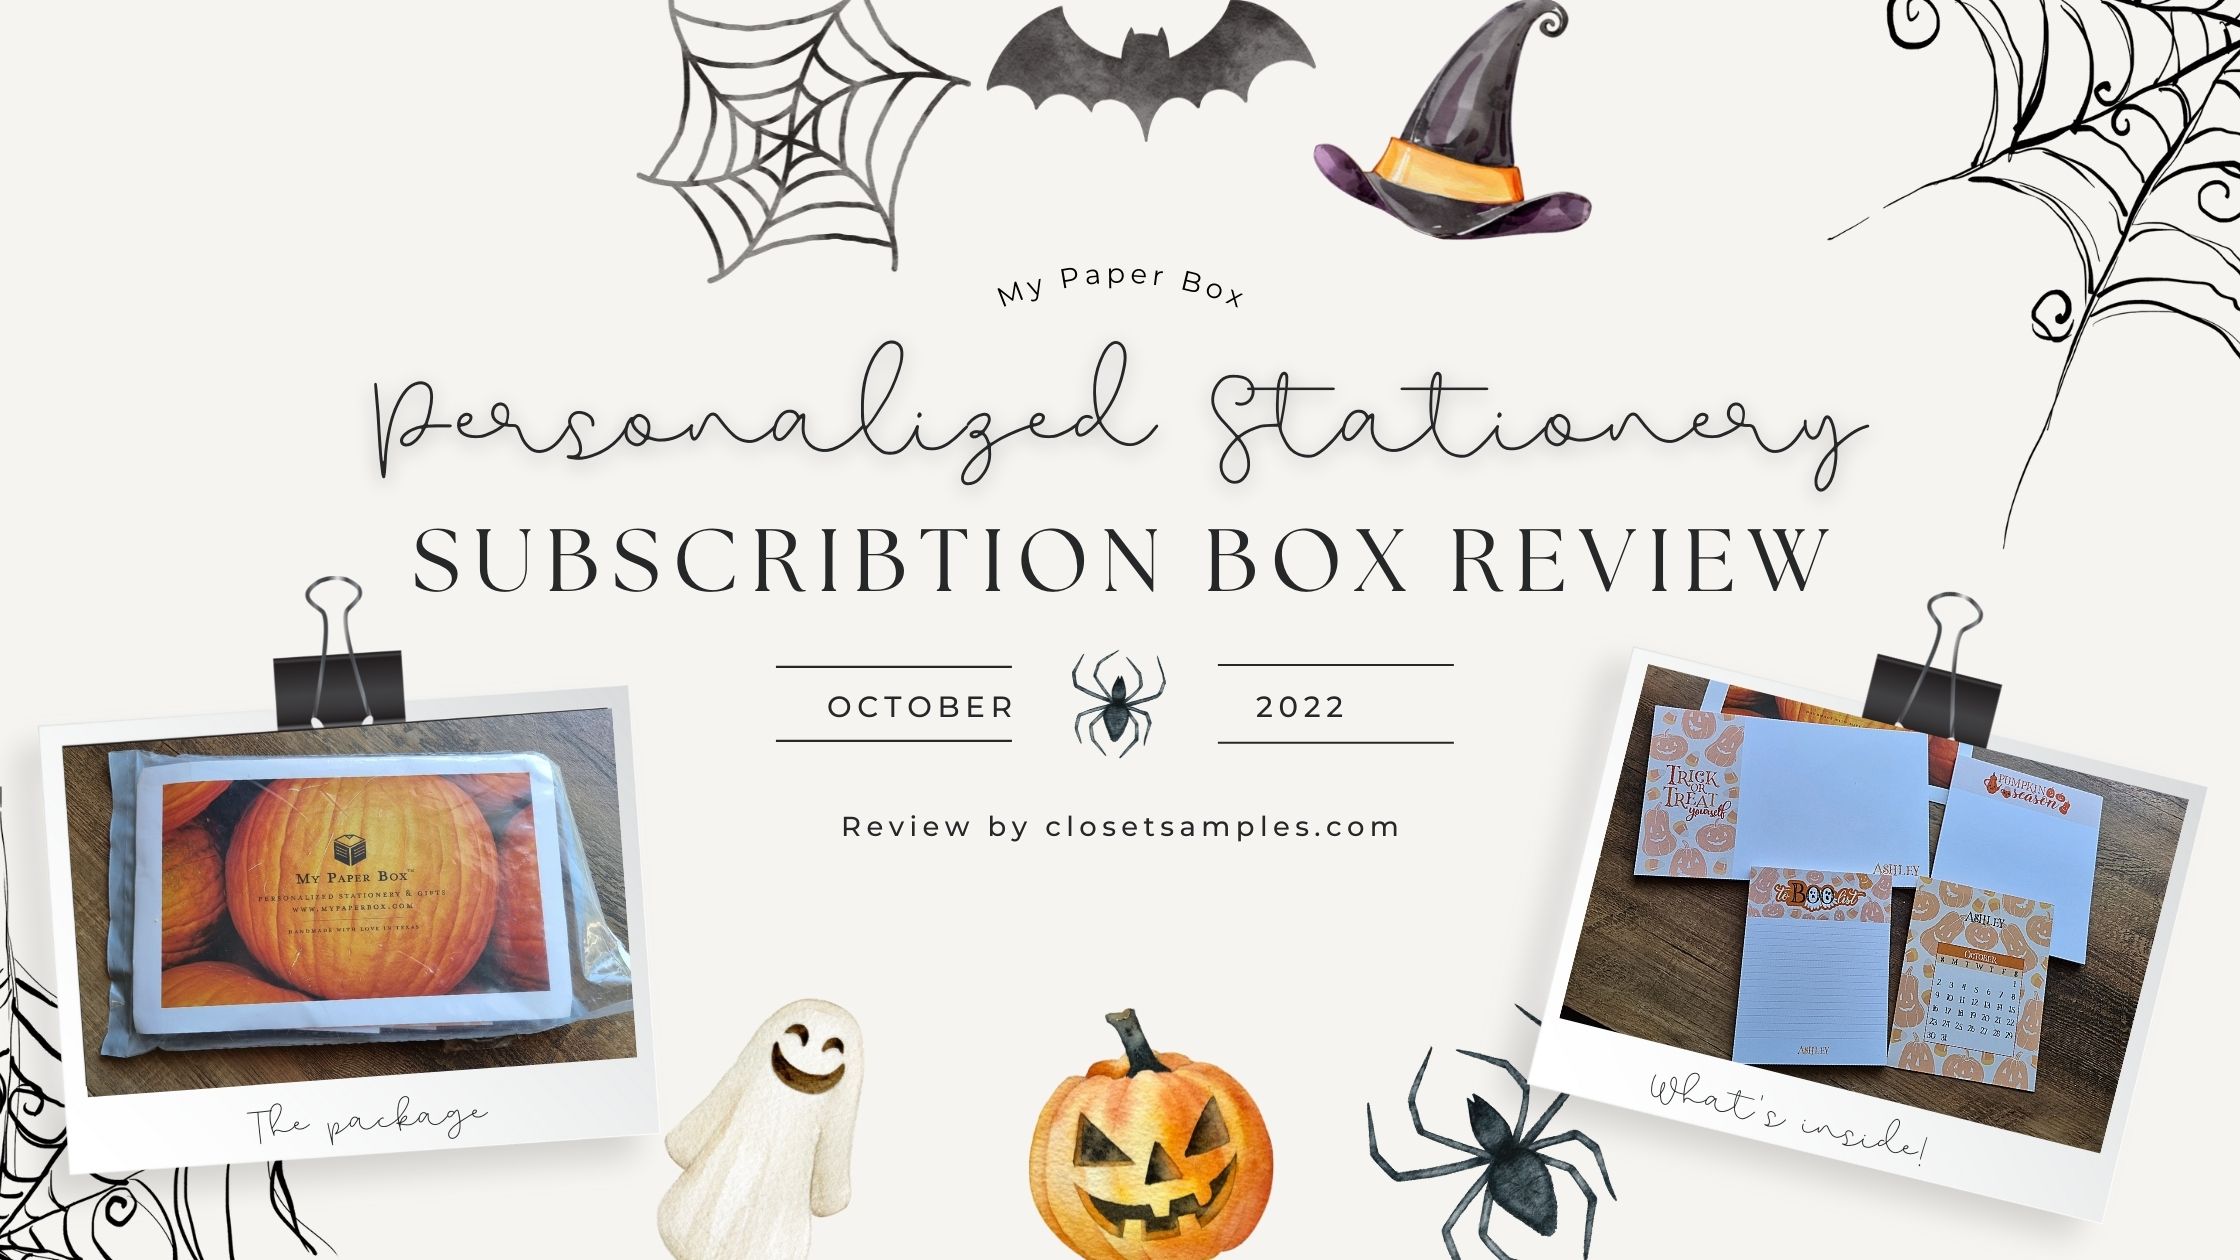 My Paper Box Personalized Stationery October 2022 Subscription Box Review Closetsamples